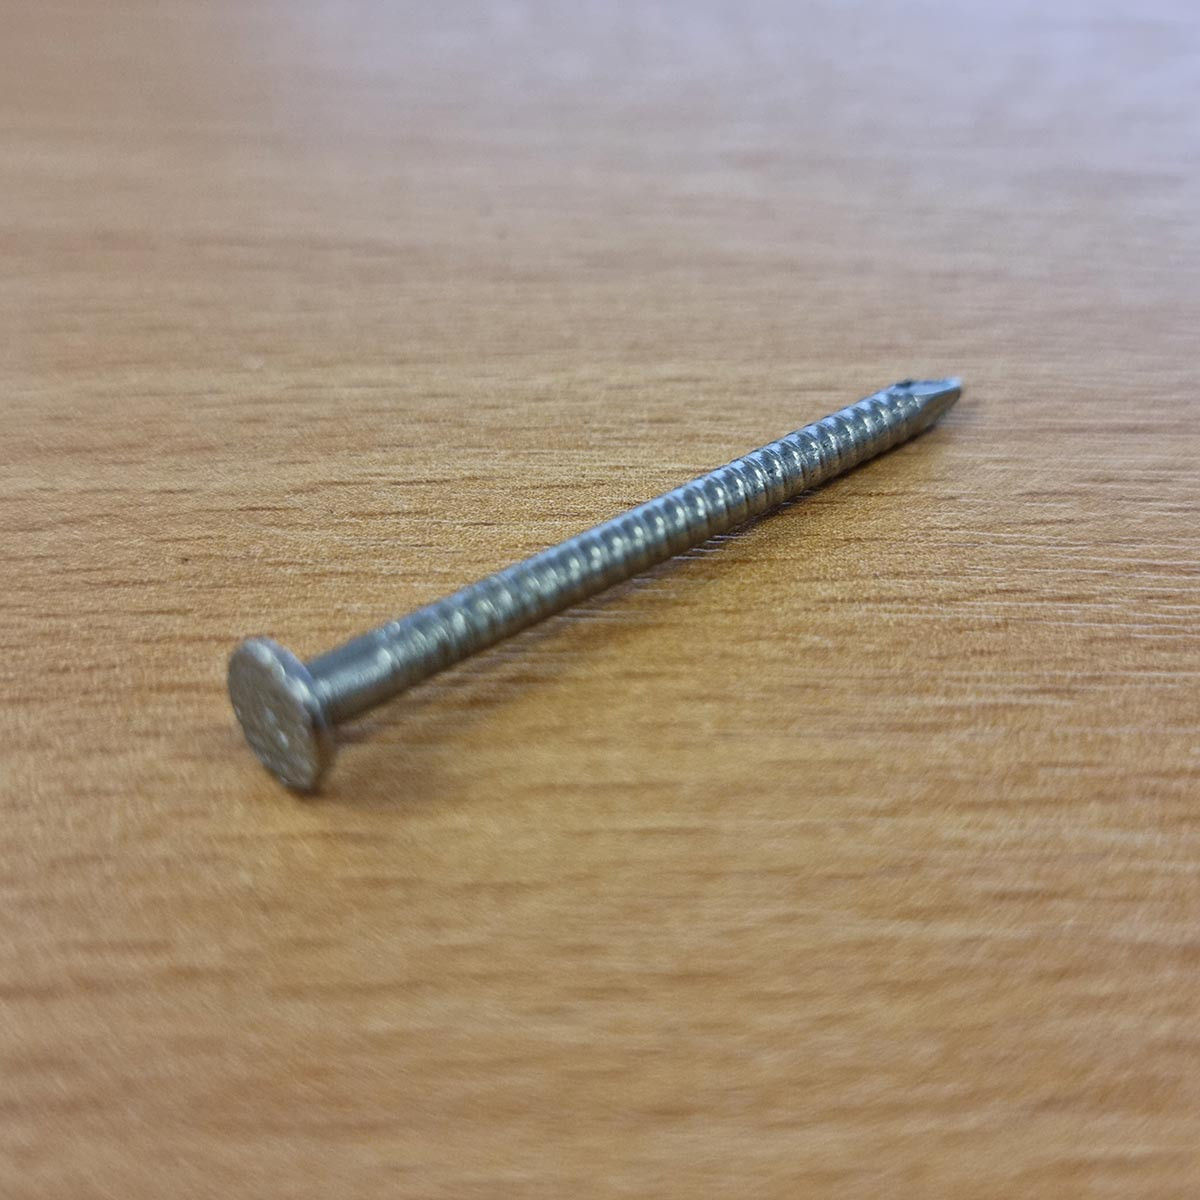 Timber Titan A2 (304) Stainless Steel Flat Head Annular Ring Nails | Buy  Decking Screws Online from the Experts at UK Timber